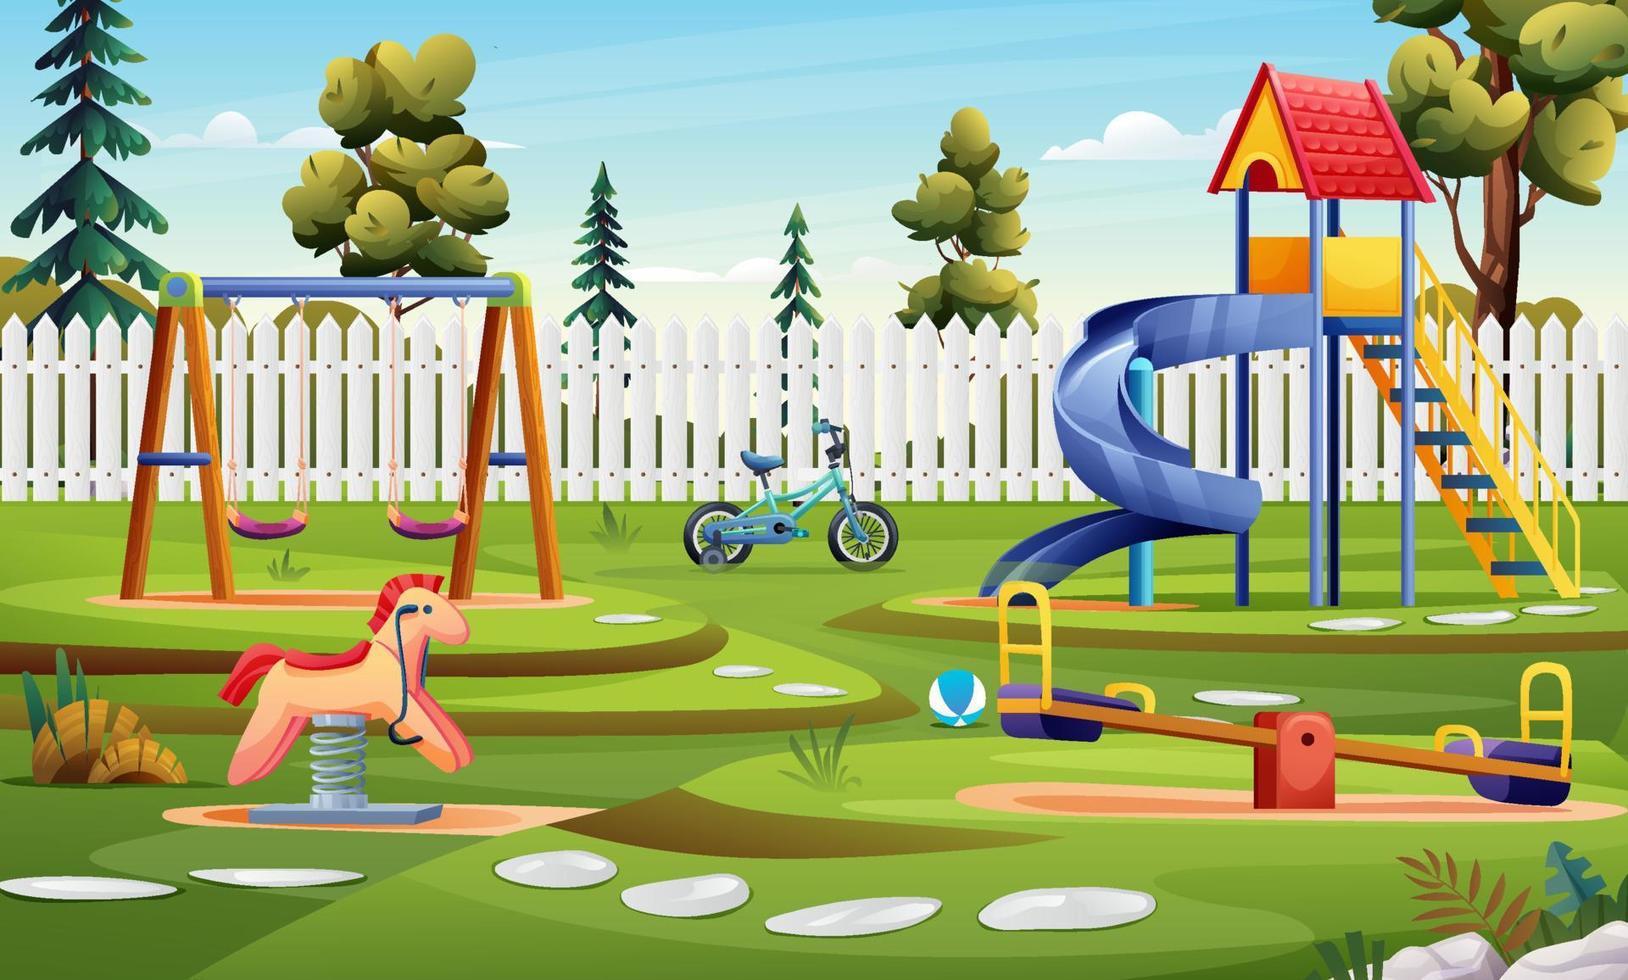 Kindergarten playground with slide, swing and bicycle cartoon illustration vector